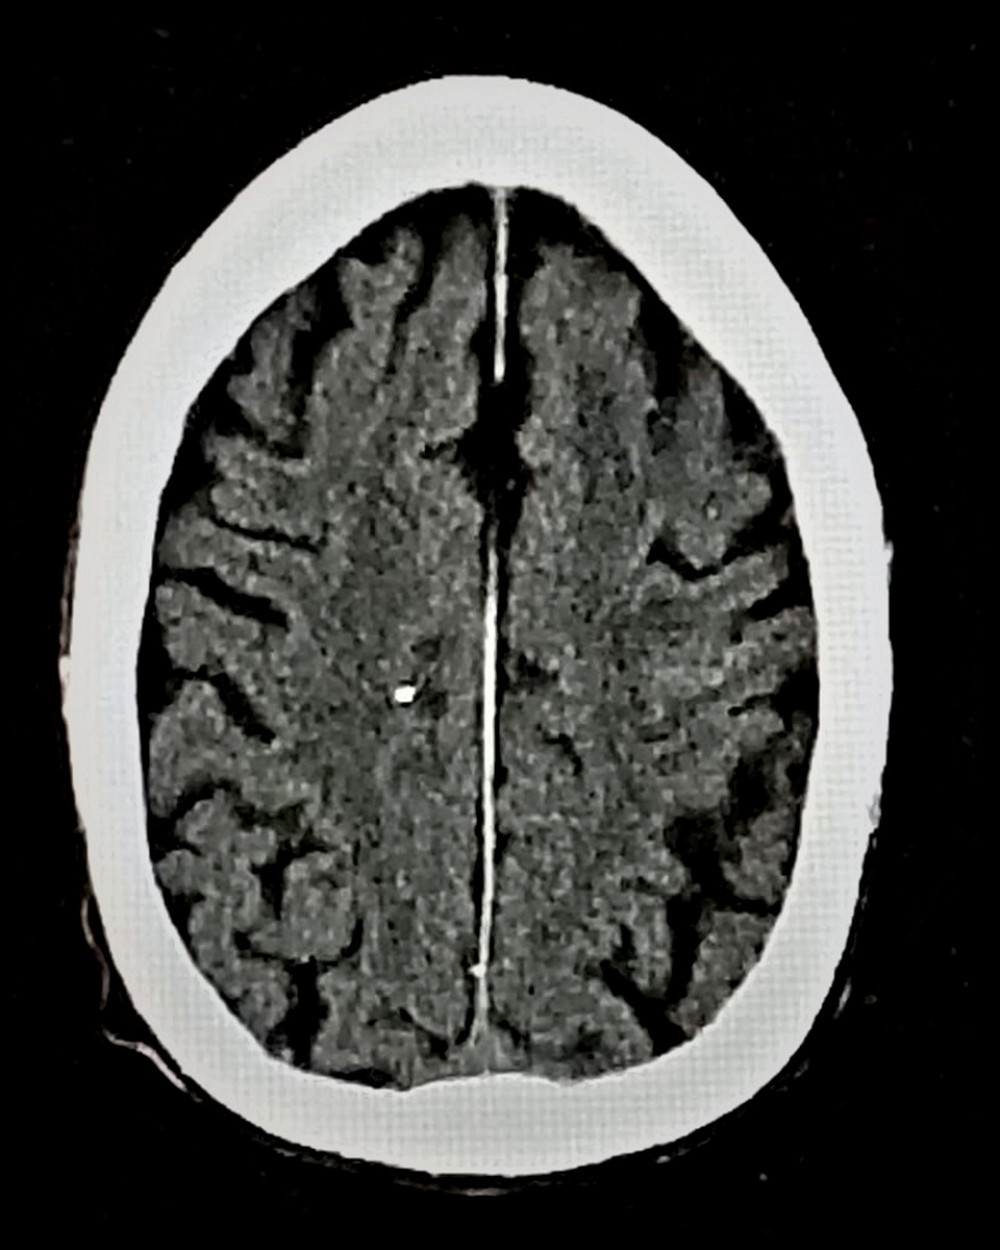 Computed tomography of the head performed 5 days after antibiotic treatment showed regression of the convexal subarachnoid hemorrhage.